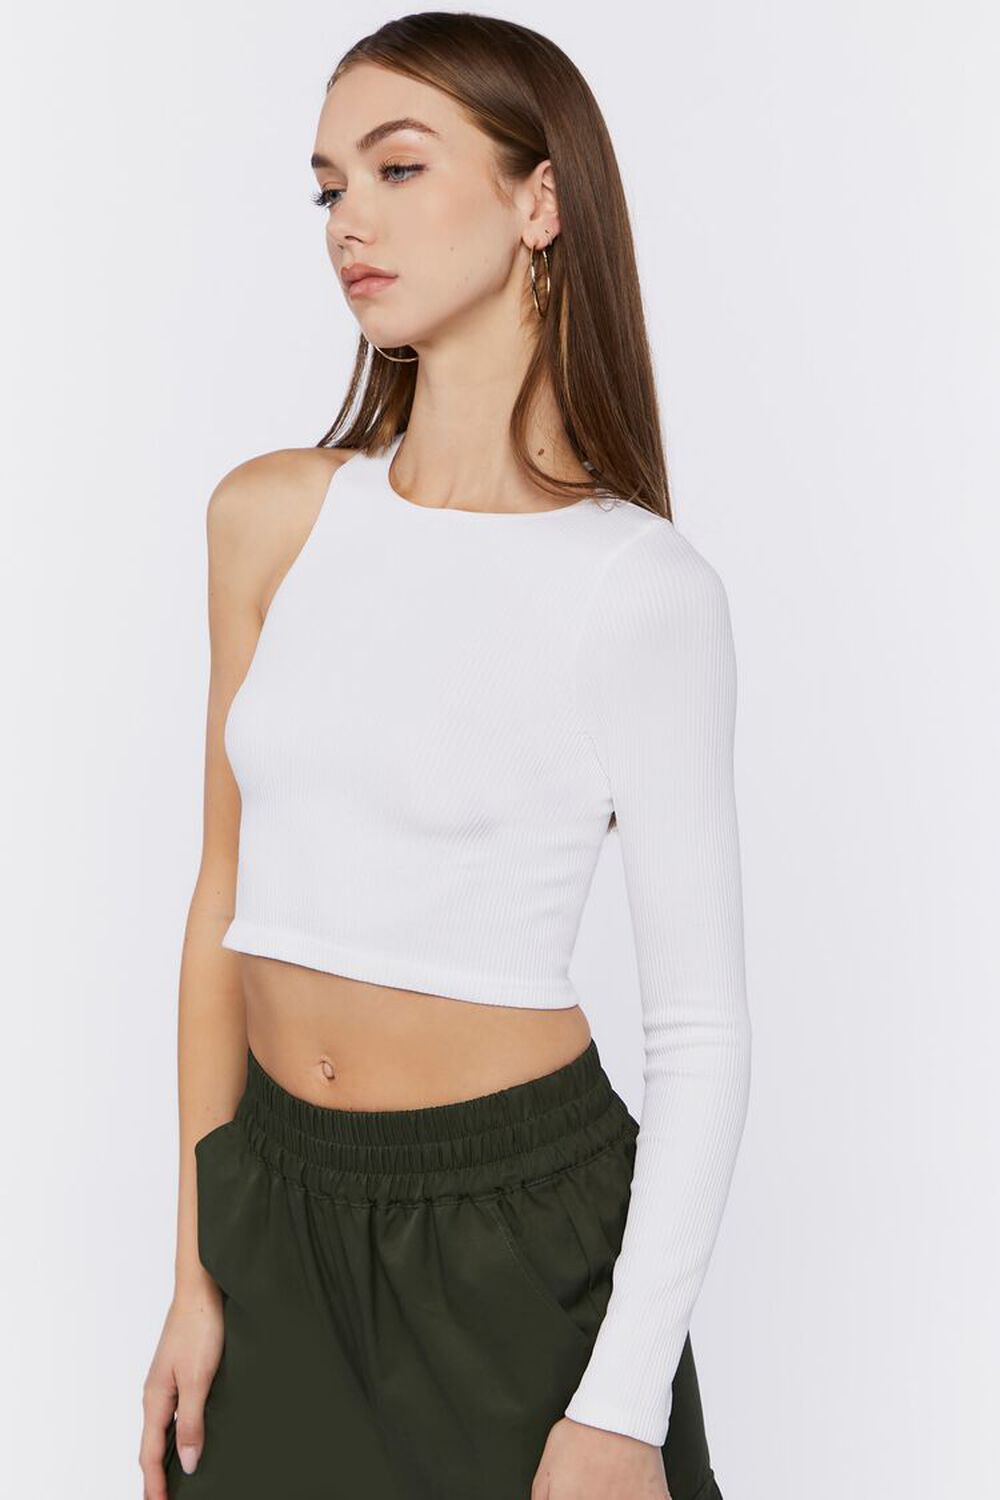 WHITE One-Sleeve Crop Top, image 2